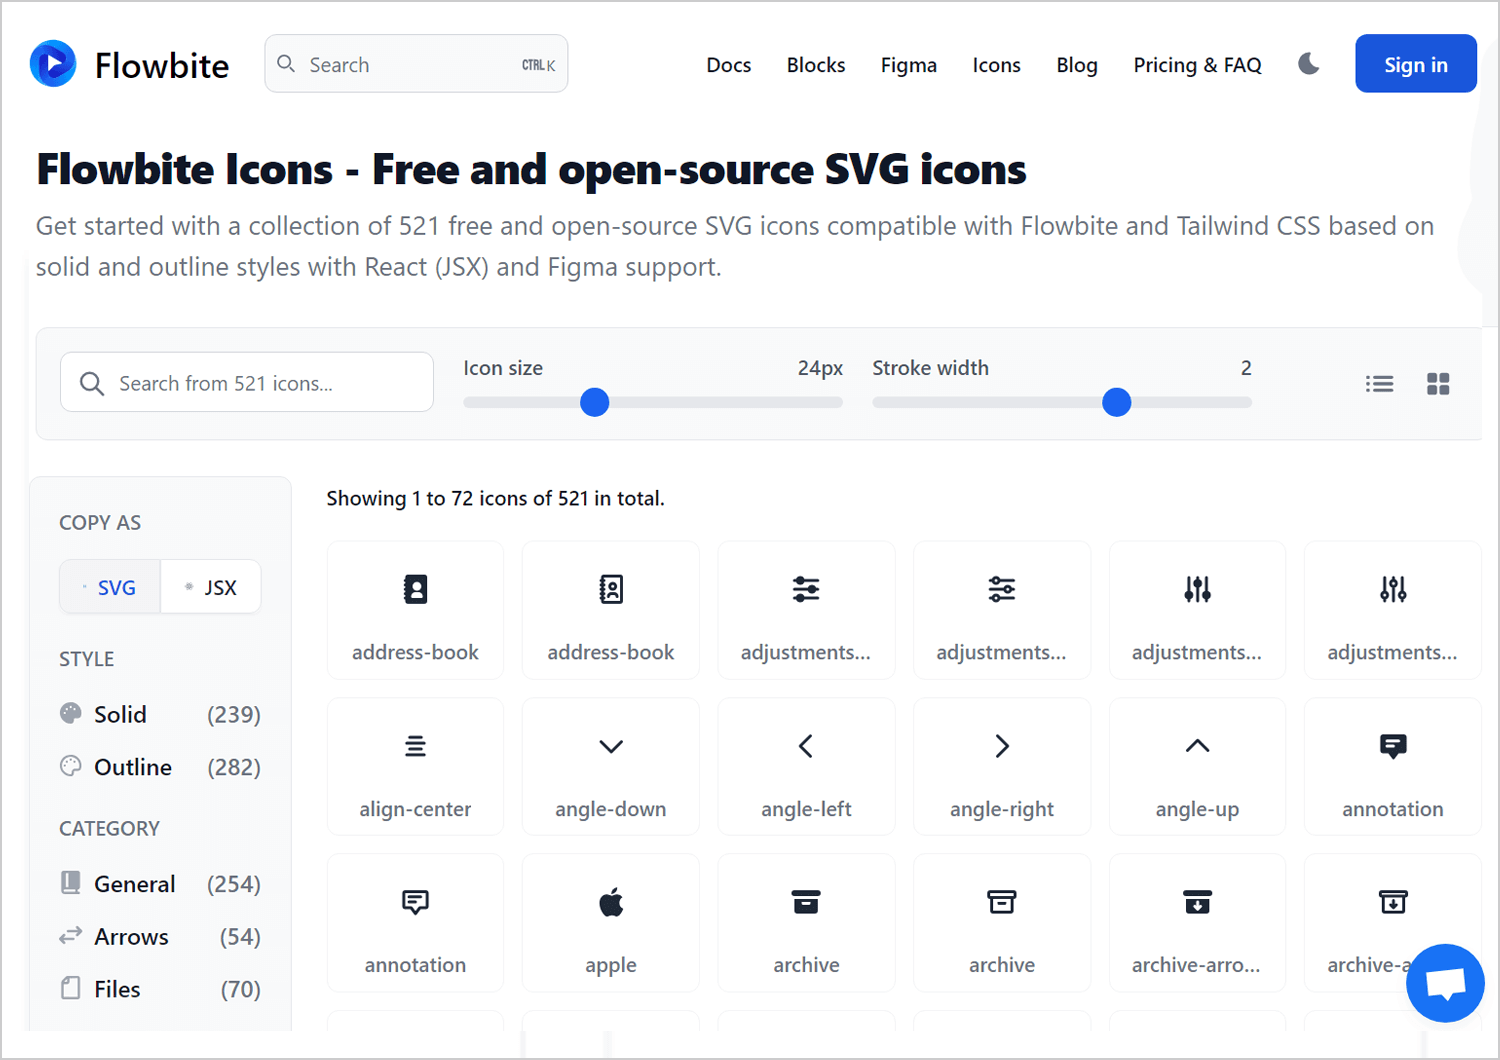 Flowbite Icons customization interface, showing icon size and stroke width controls, with a selection of free SVG icons